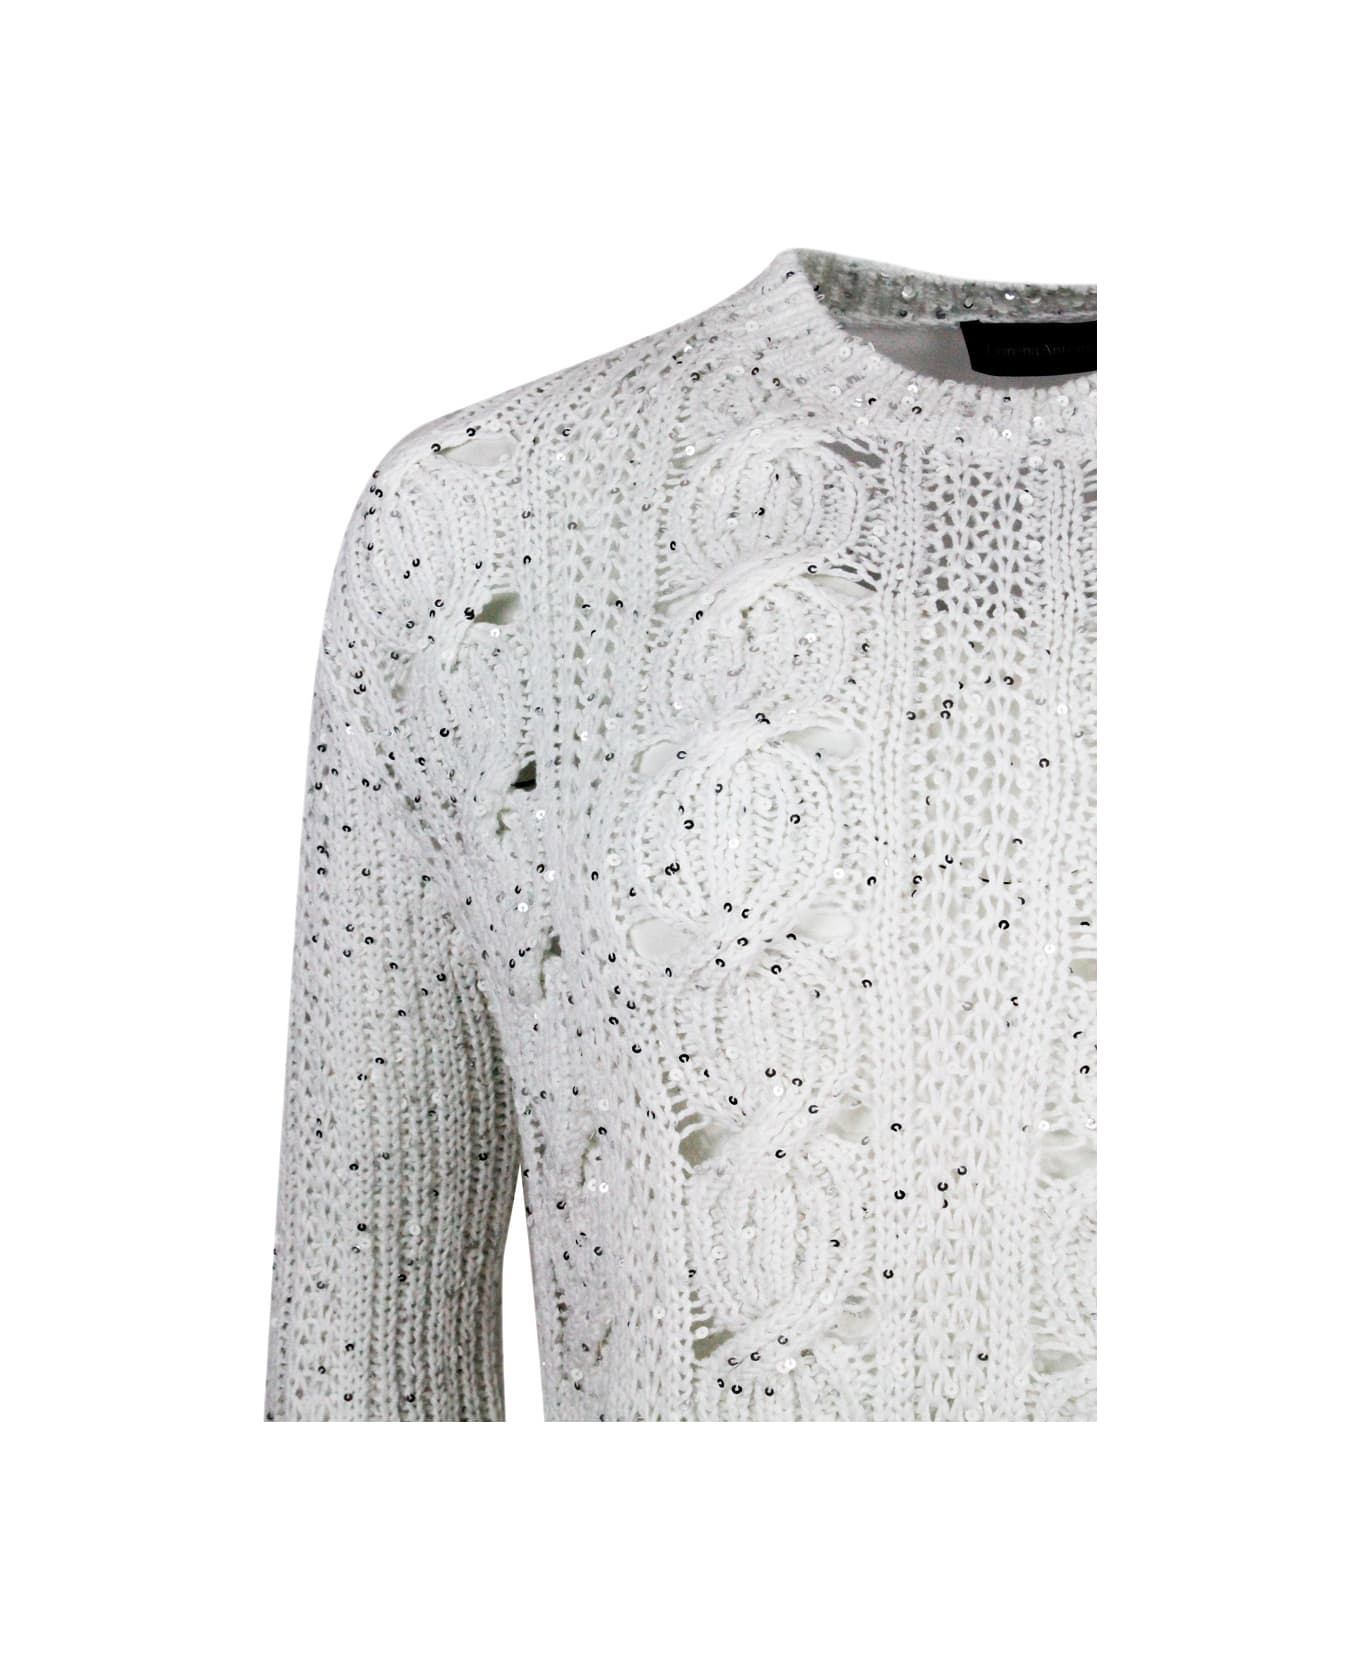 Lorena Antoniazzi Long-sleeved Crew-neck Sweater In Cotton With Braided Work Embellished With Microsequins And Back Part In Breathable Technical Fabric - White